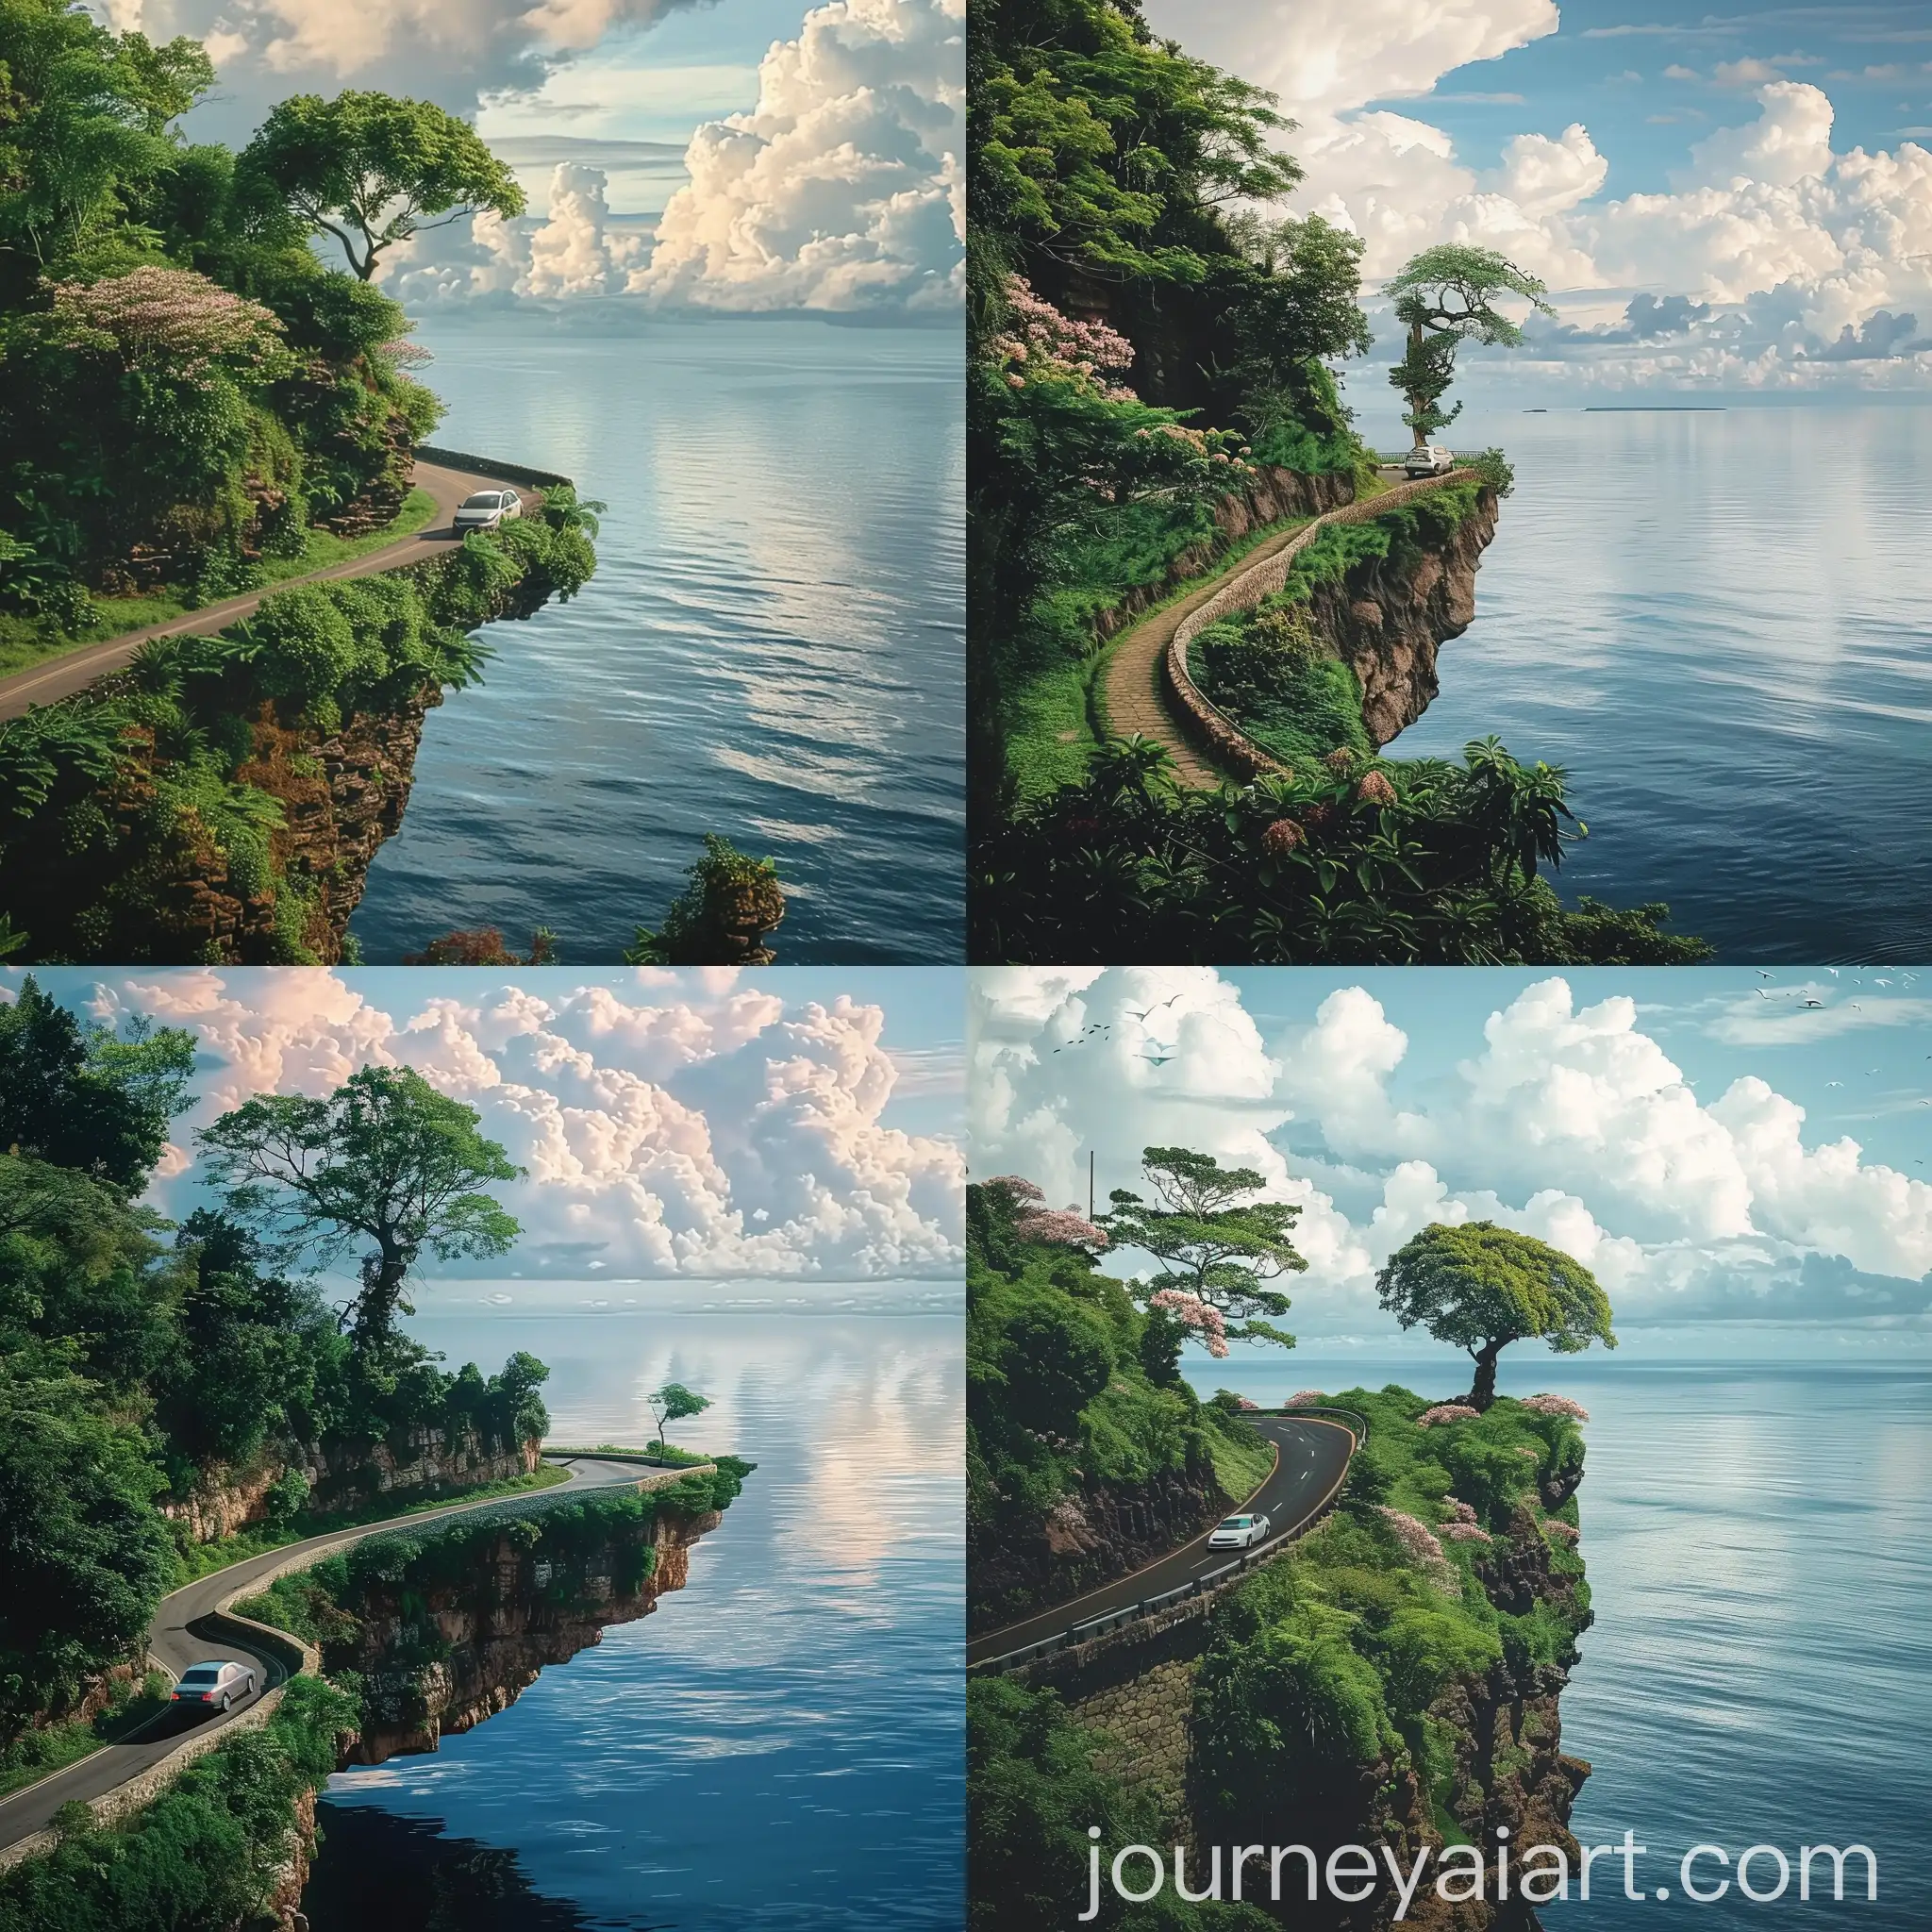 A car drives along a winding coastal road built into the side of a cliff, with lush green vegetation on one side and a calm, expansive body of water on the other. The road features a stone barrier separating it from the steep drop to the water below.